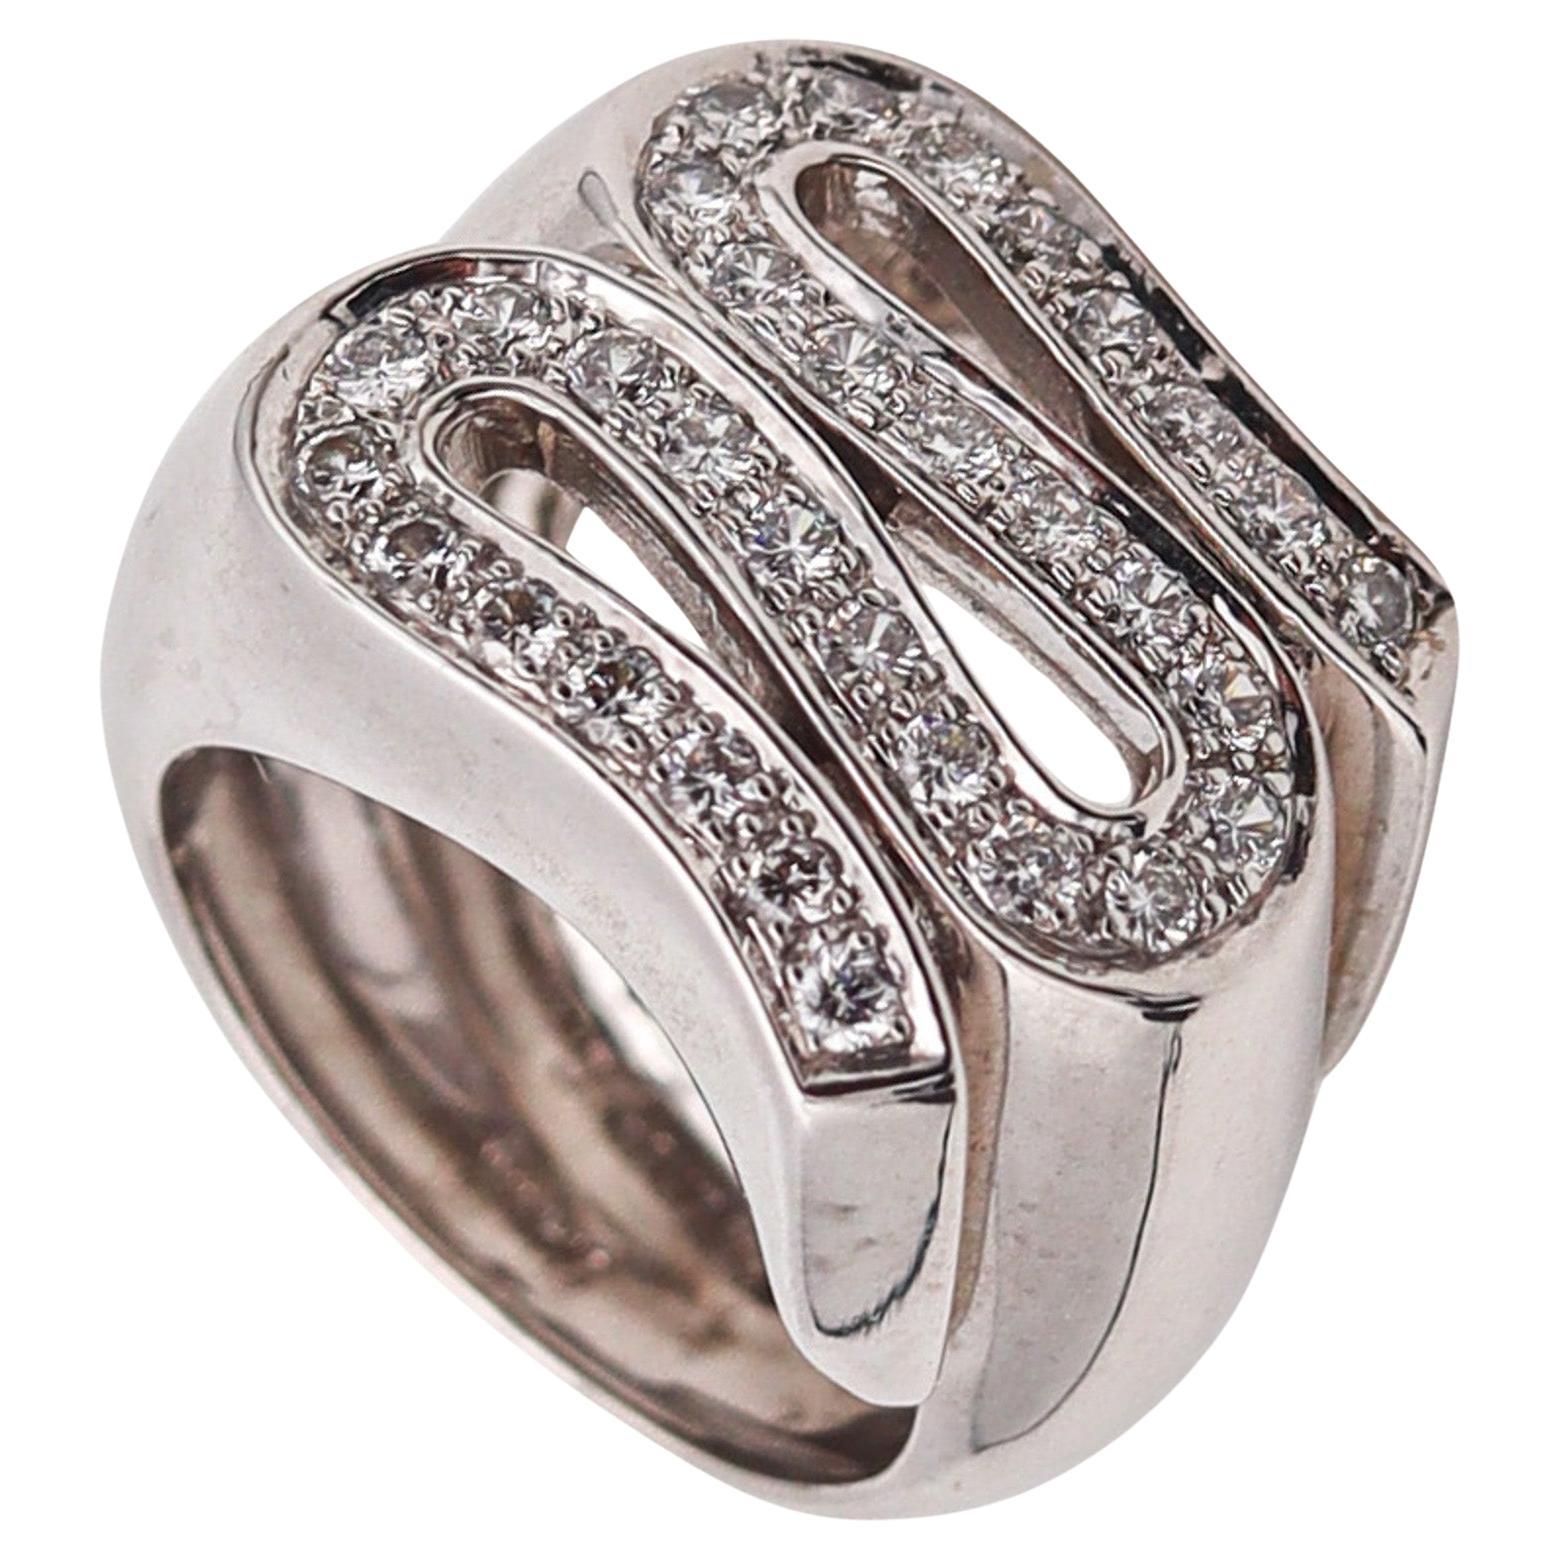 Gianni Versace 1990 Cocktail Ring In 18Kt White Gold With 1.03 Ctw In Diamonds